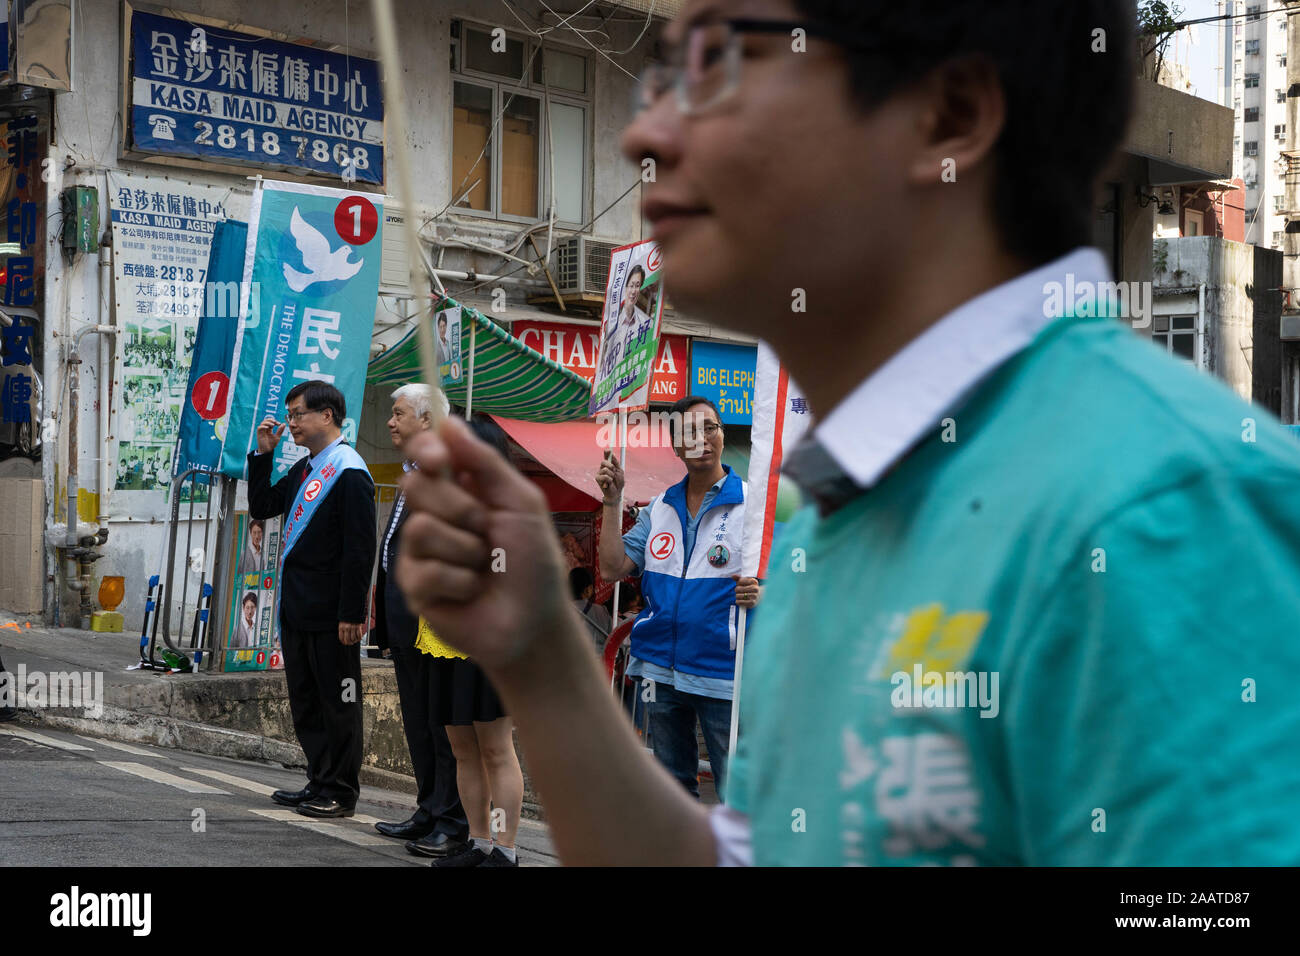 Candidates campaign for final support from voters outside a polling station.Hong Kong voters queue up by the hundreds at local polling stations for district council elections, citing concerns from both pro-democracy and pro-establishment camps that voting could be halted later in the day. Against the backdrop of continuing social unrest that has paralyzed the city since June, Hong Kong is expecting one of the largest turn out of voters since the establishment of the special administrative region. Stock Photo